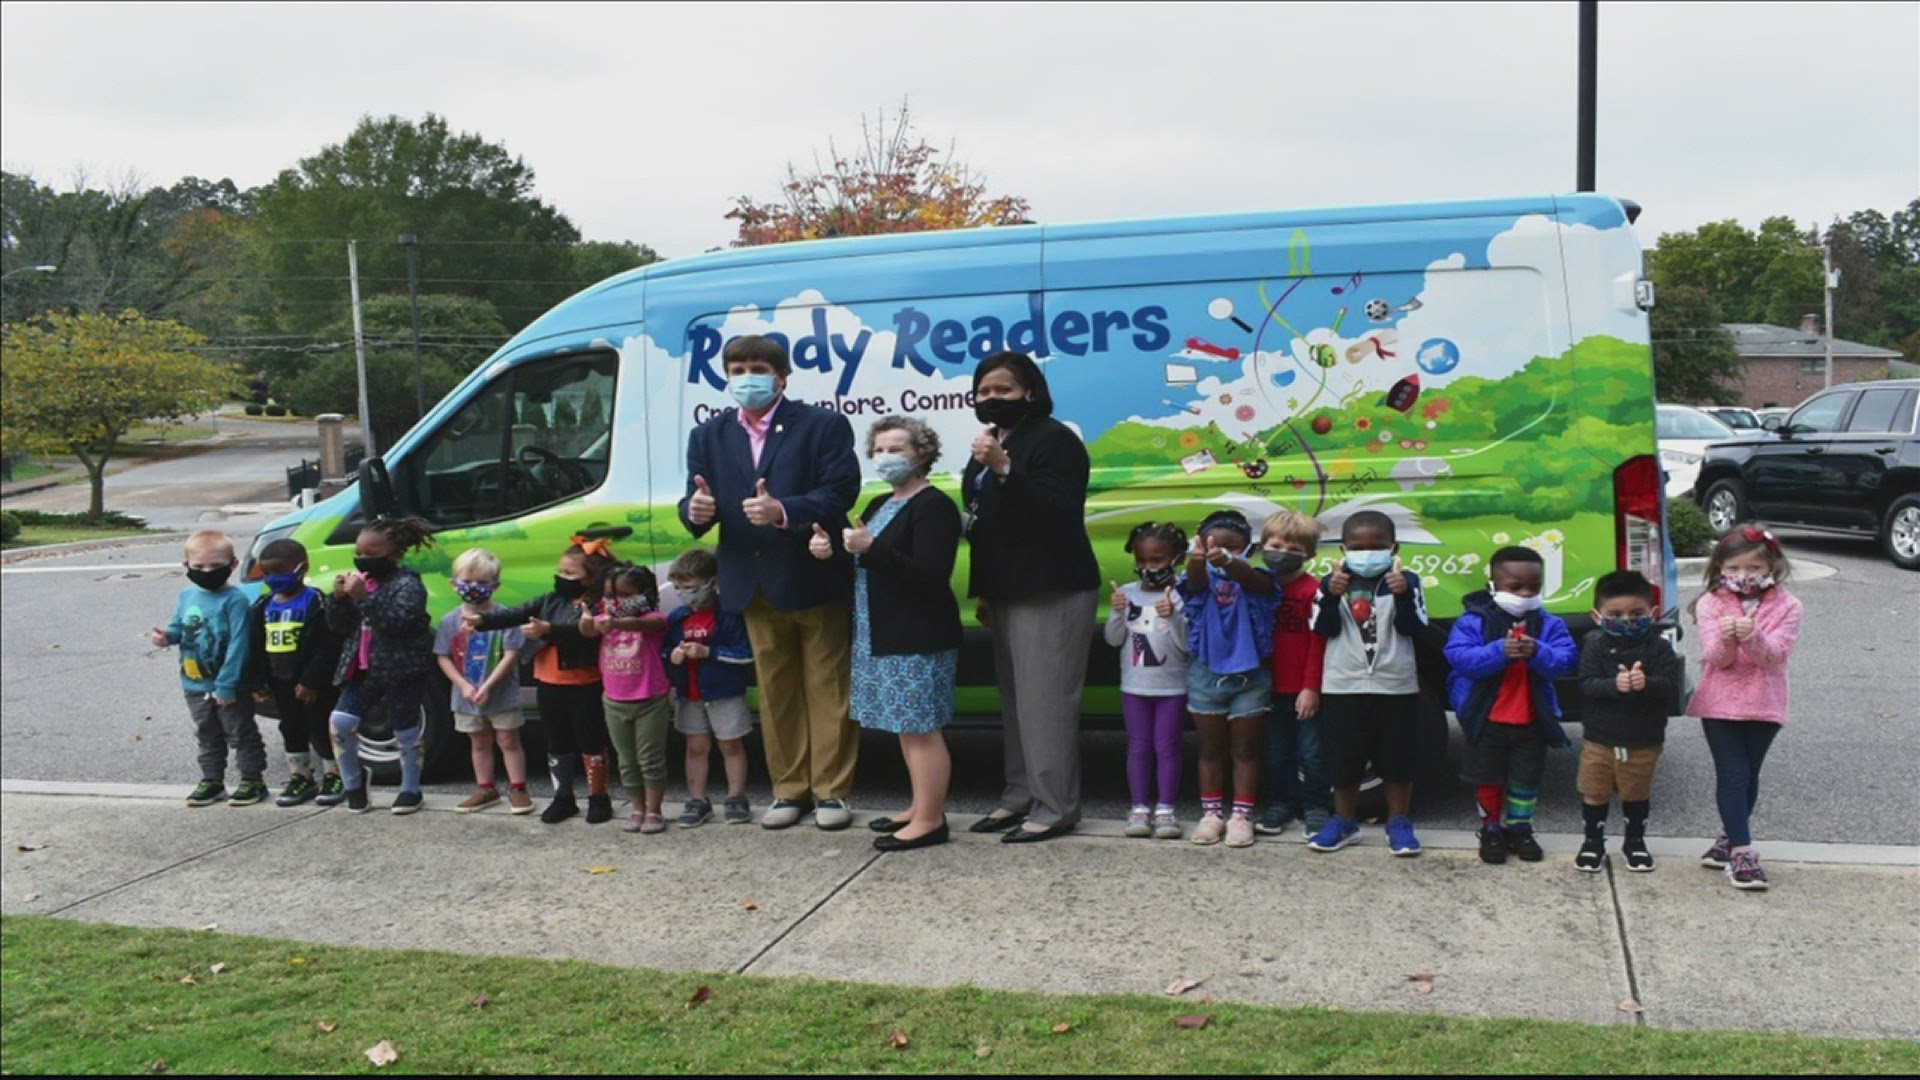 The Huntsville-Madison County Public Library unveiled a new outreach vehicle to help provide services to the community.